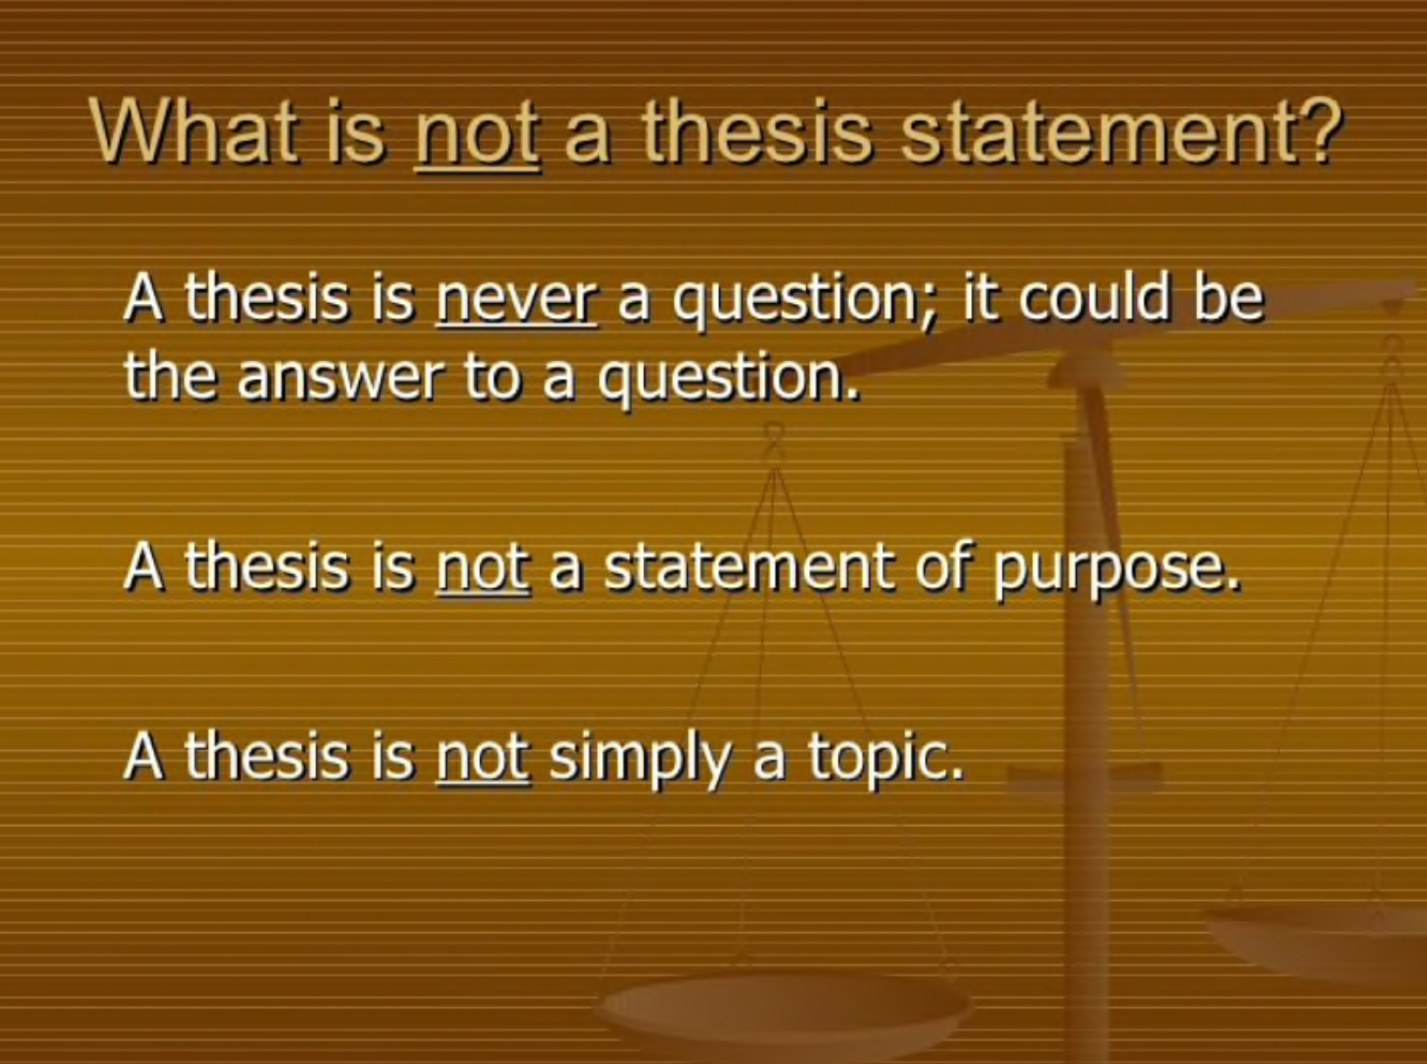 thesis statement is a dash of your speech